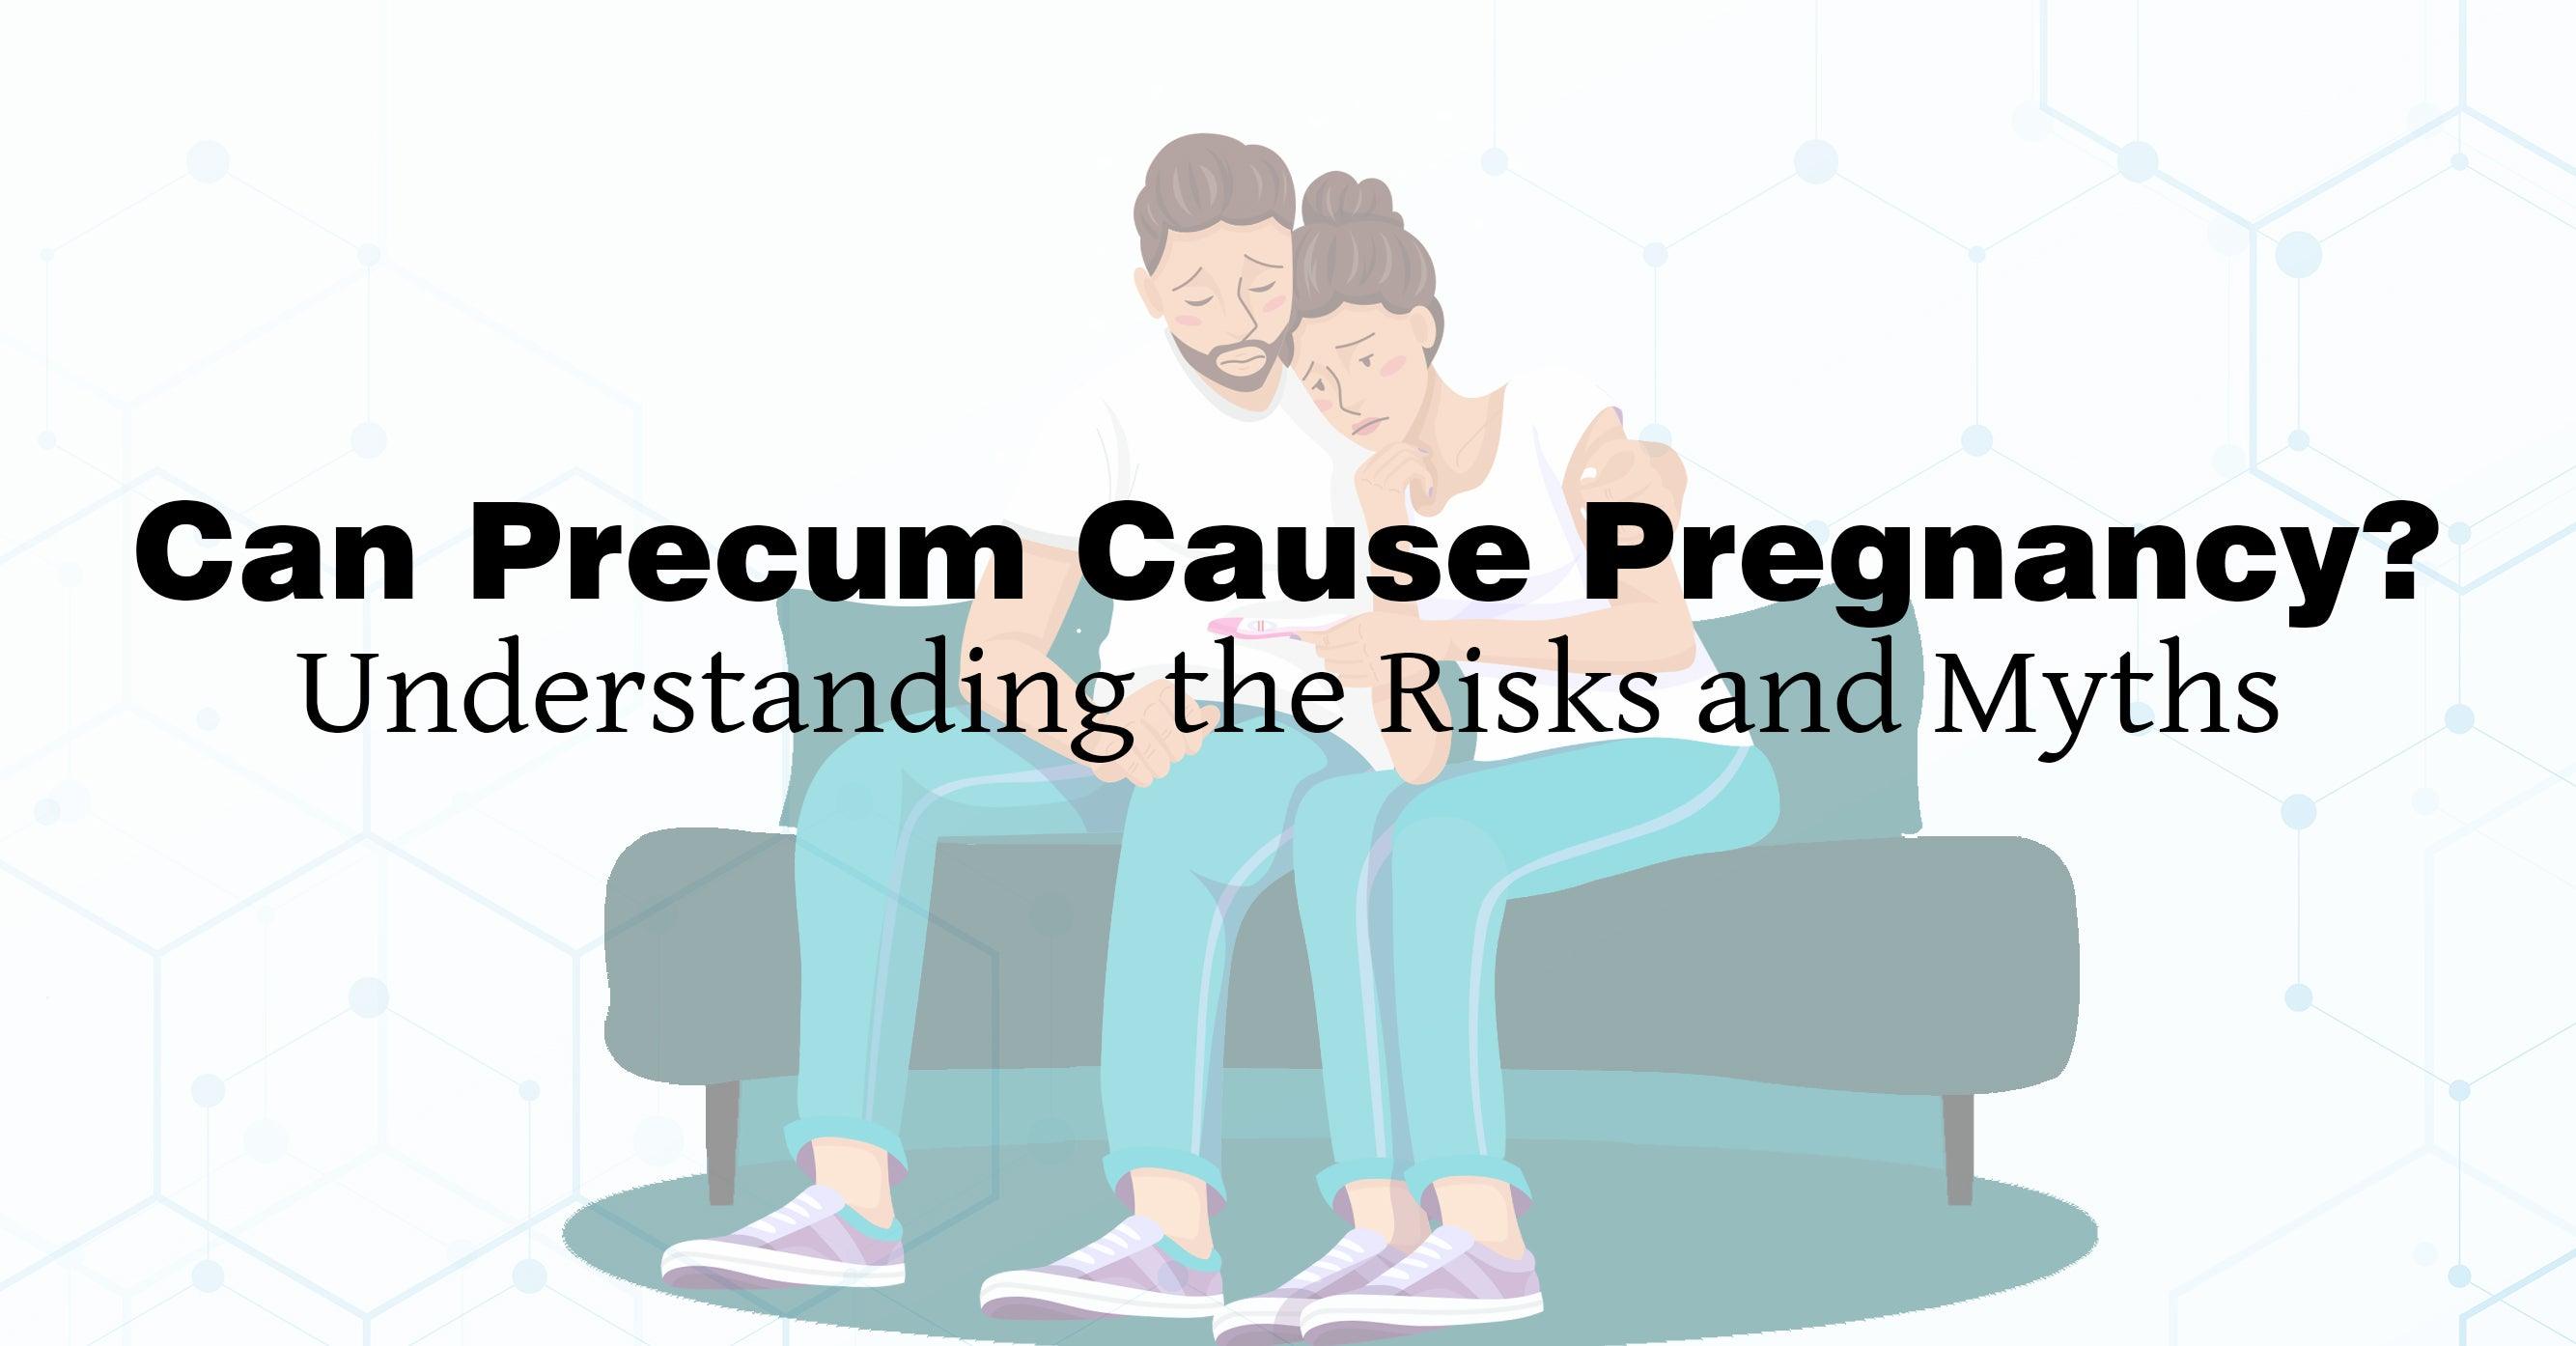 Can Precum Cause Pregnancy? Understanding the Risks and Myths